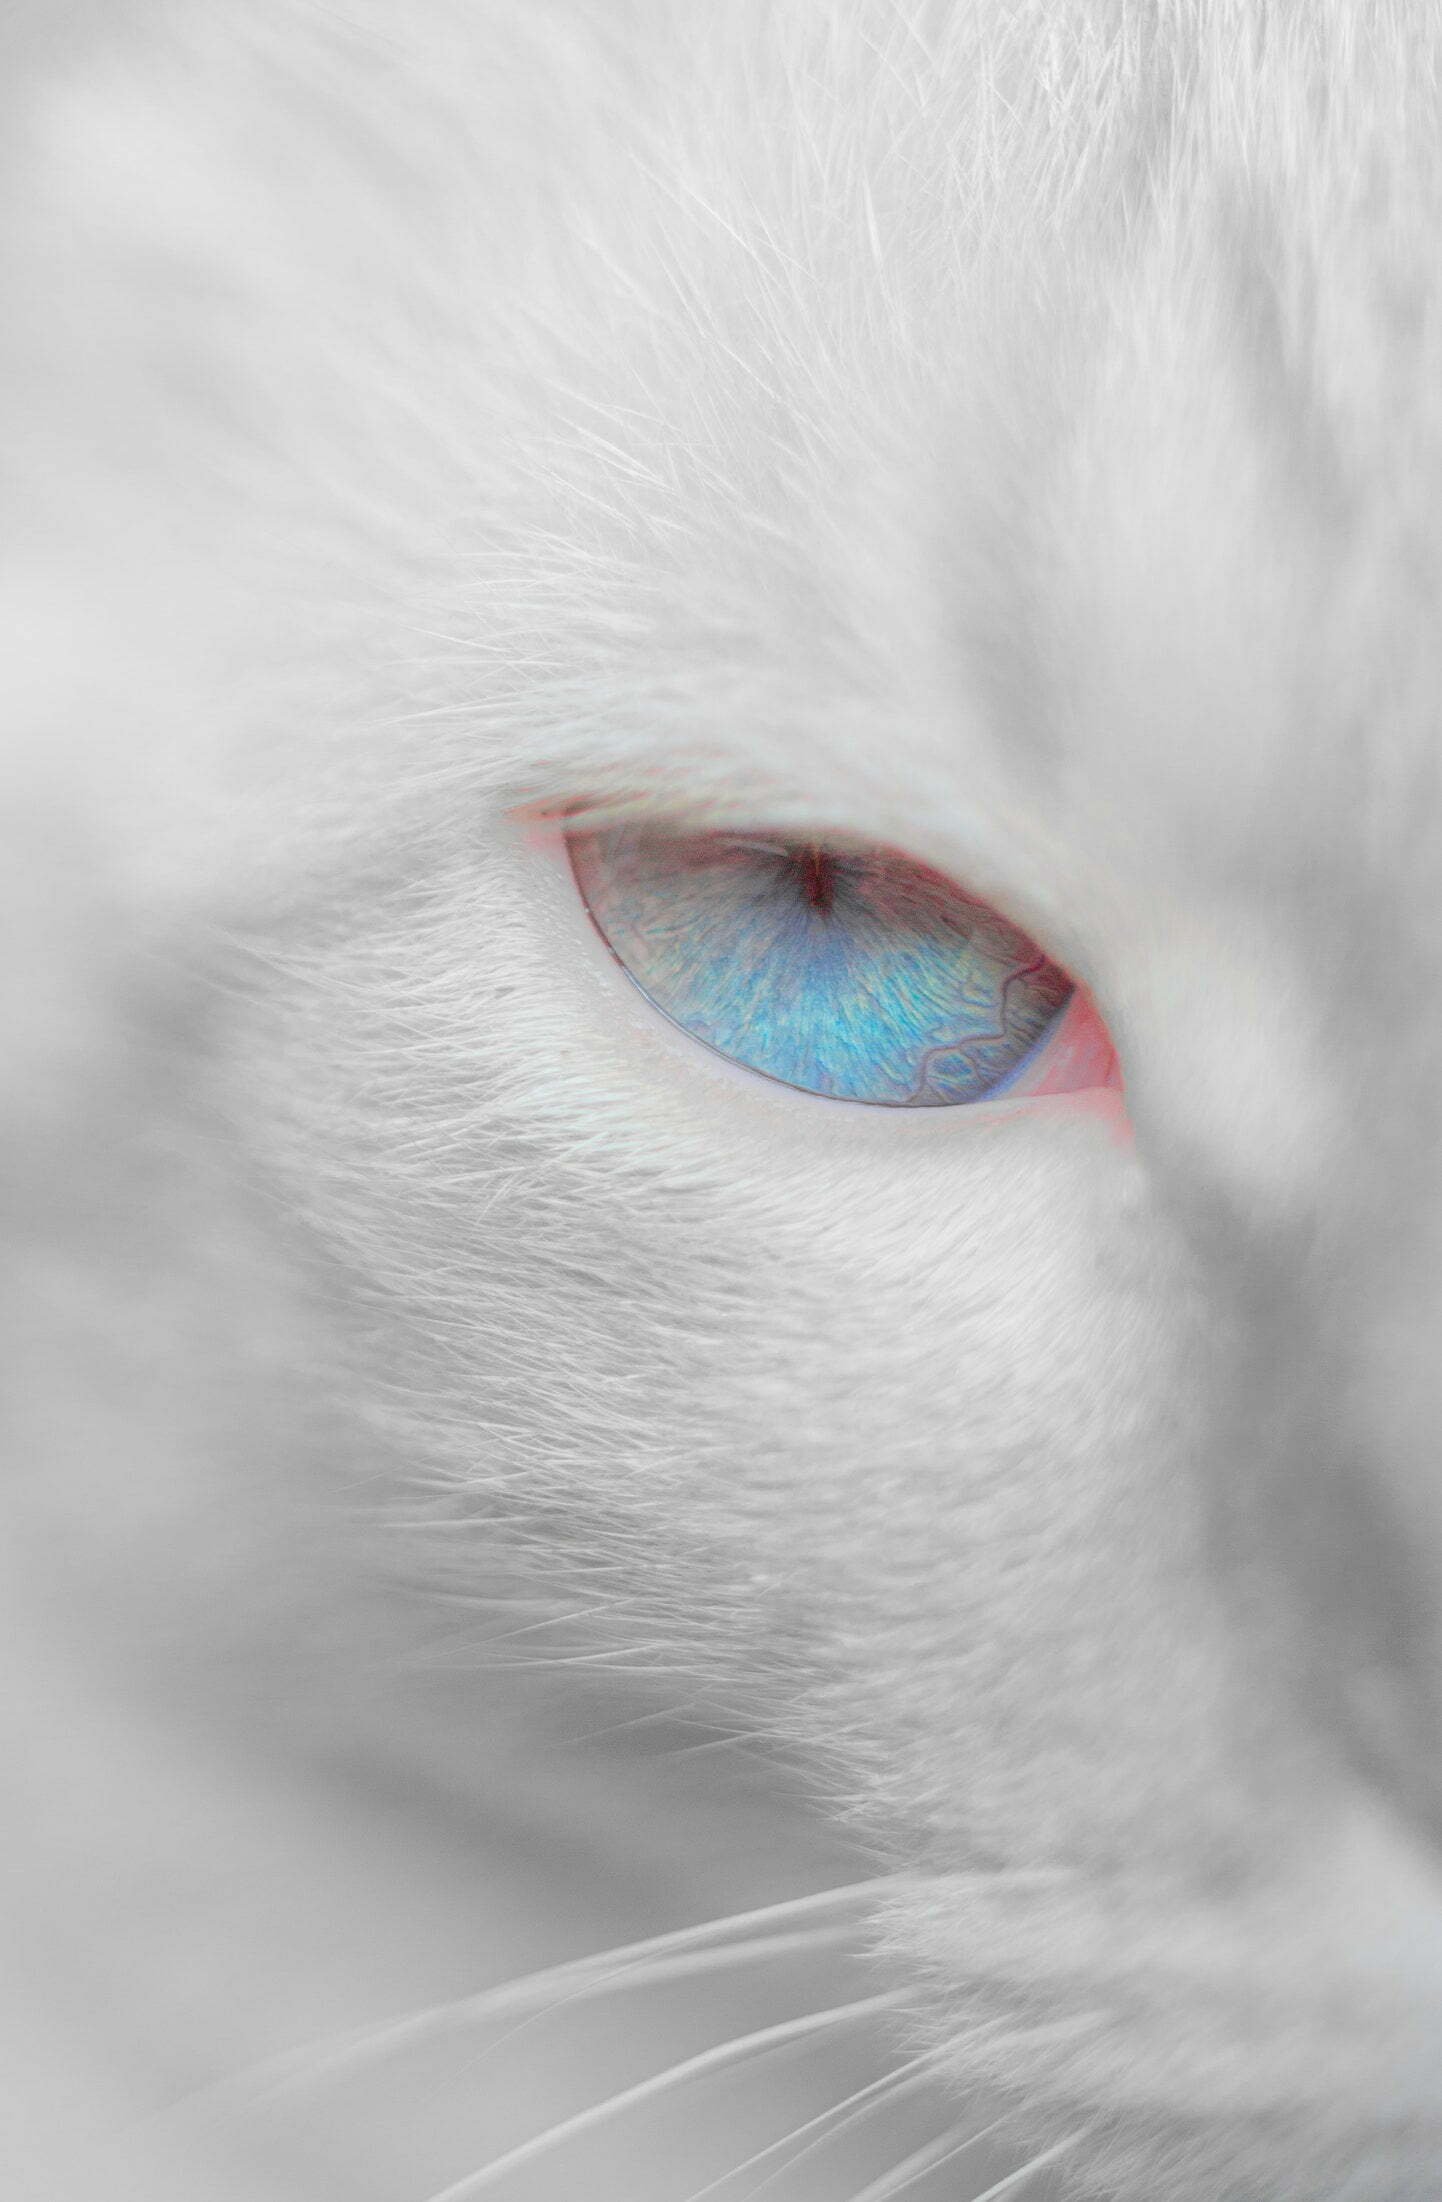 White cat with bright blue eyes wallpaper for phone - WallpapersUpdate